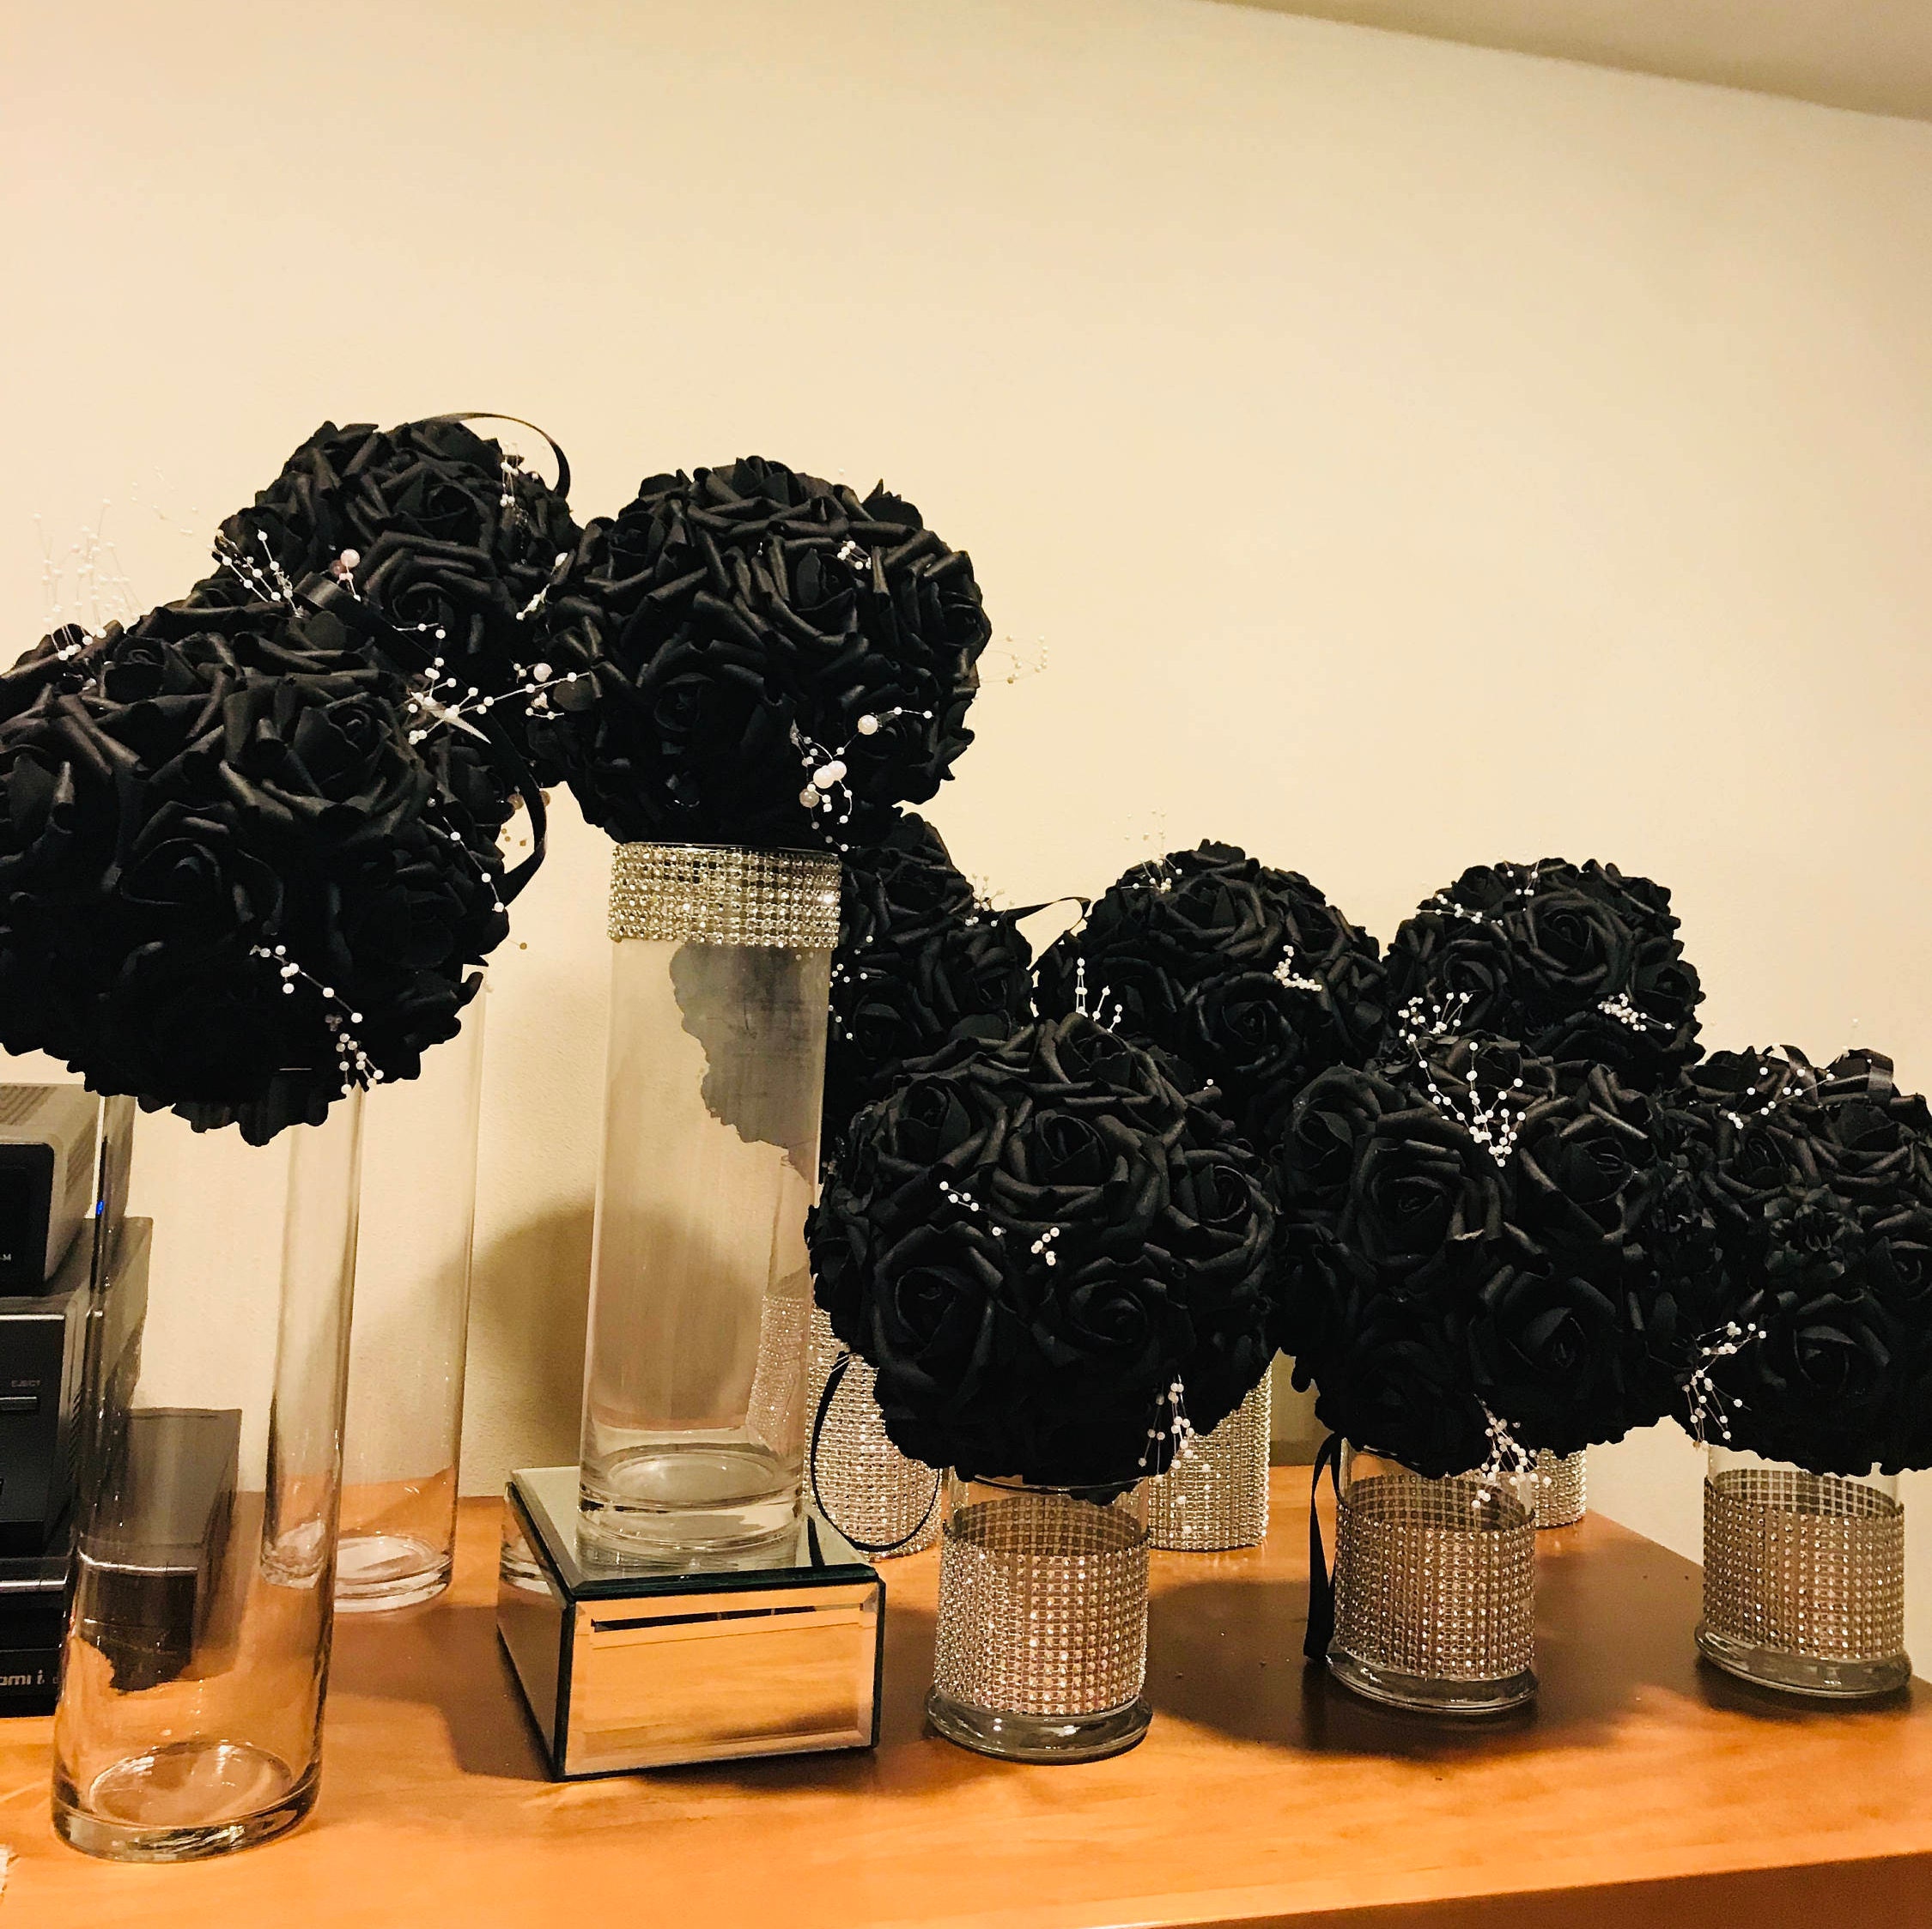 Centerpieces 6 Cylinder Vases Beautifully Decorated With a Black